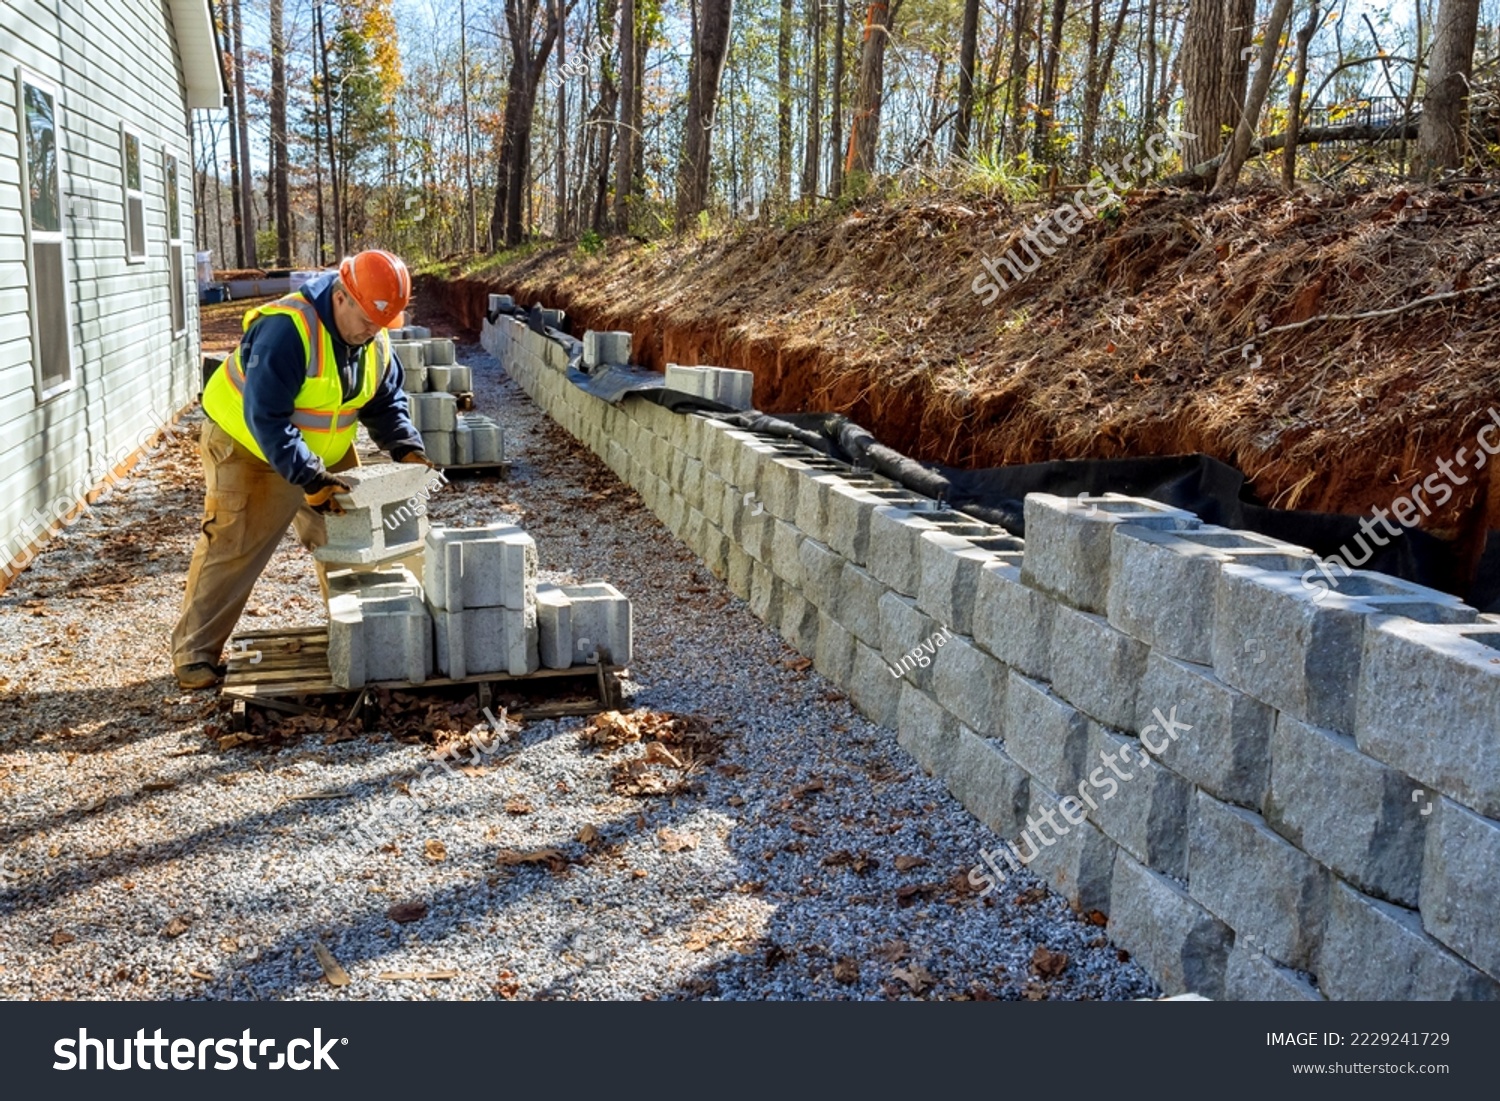 Contractor was seen installing concrete block wall that is being built on part new retaining wall construction project #2229241729